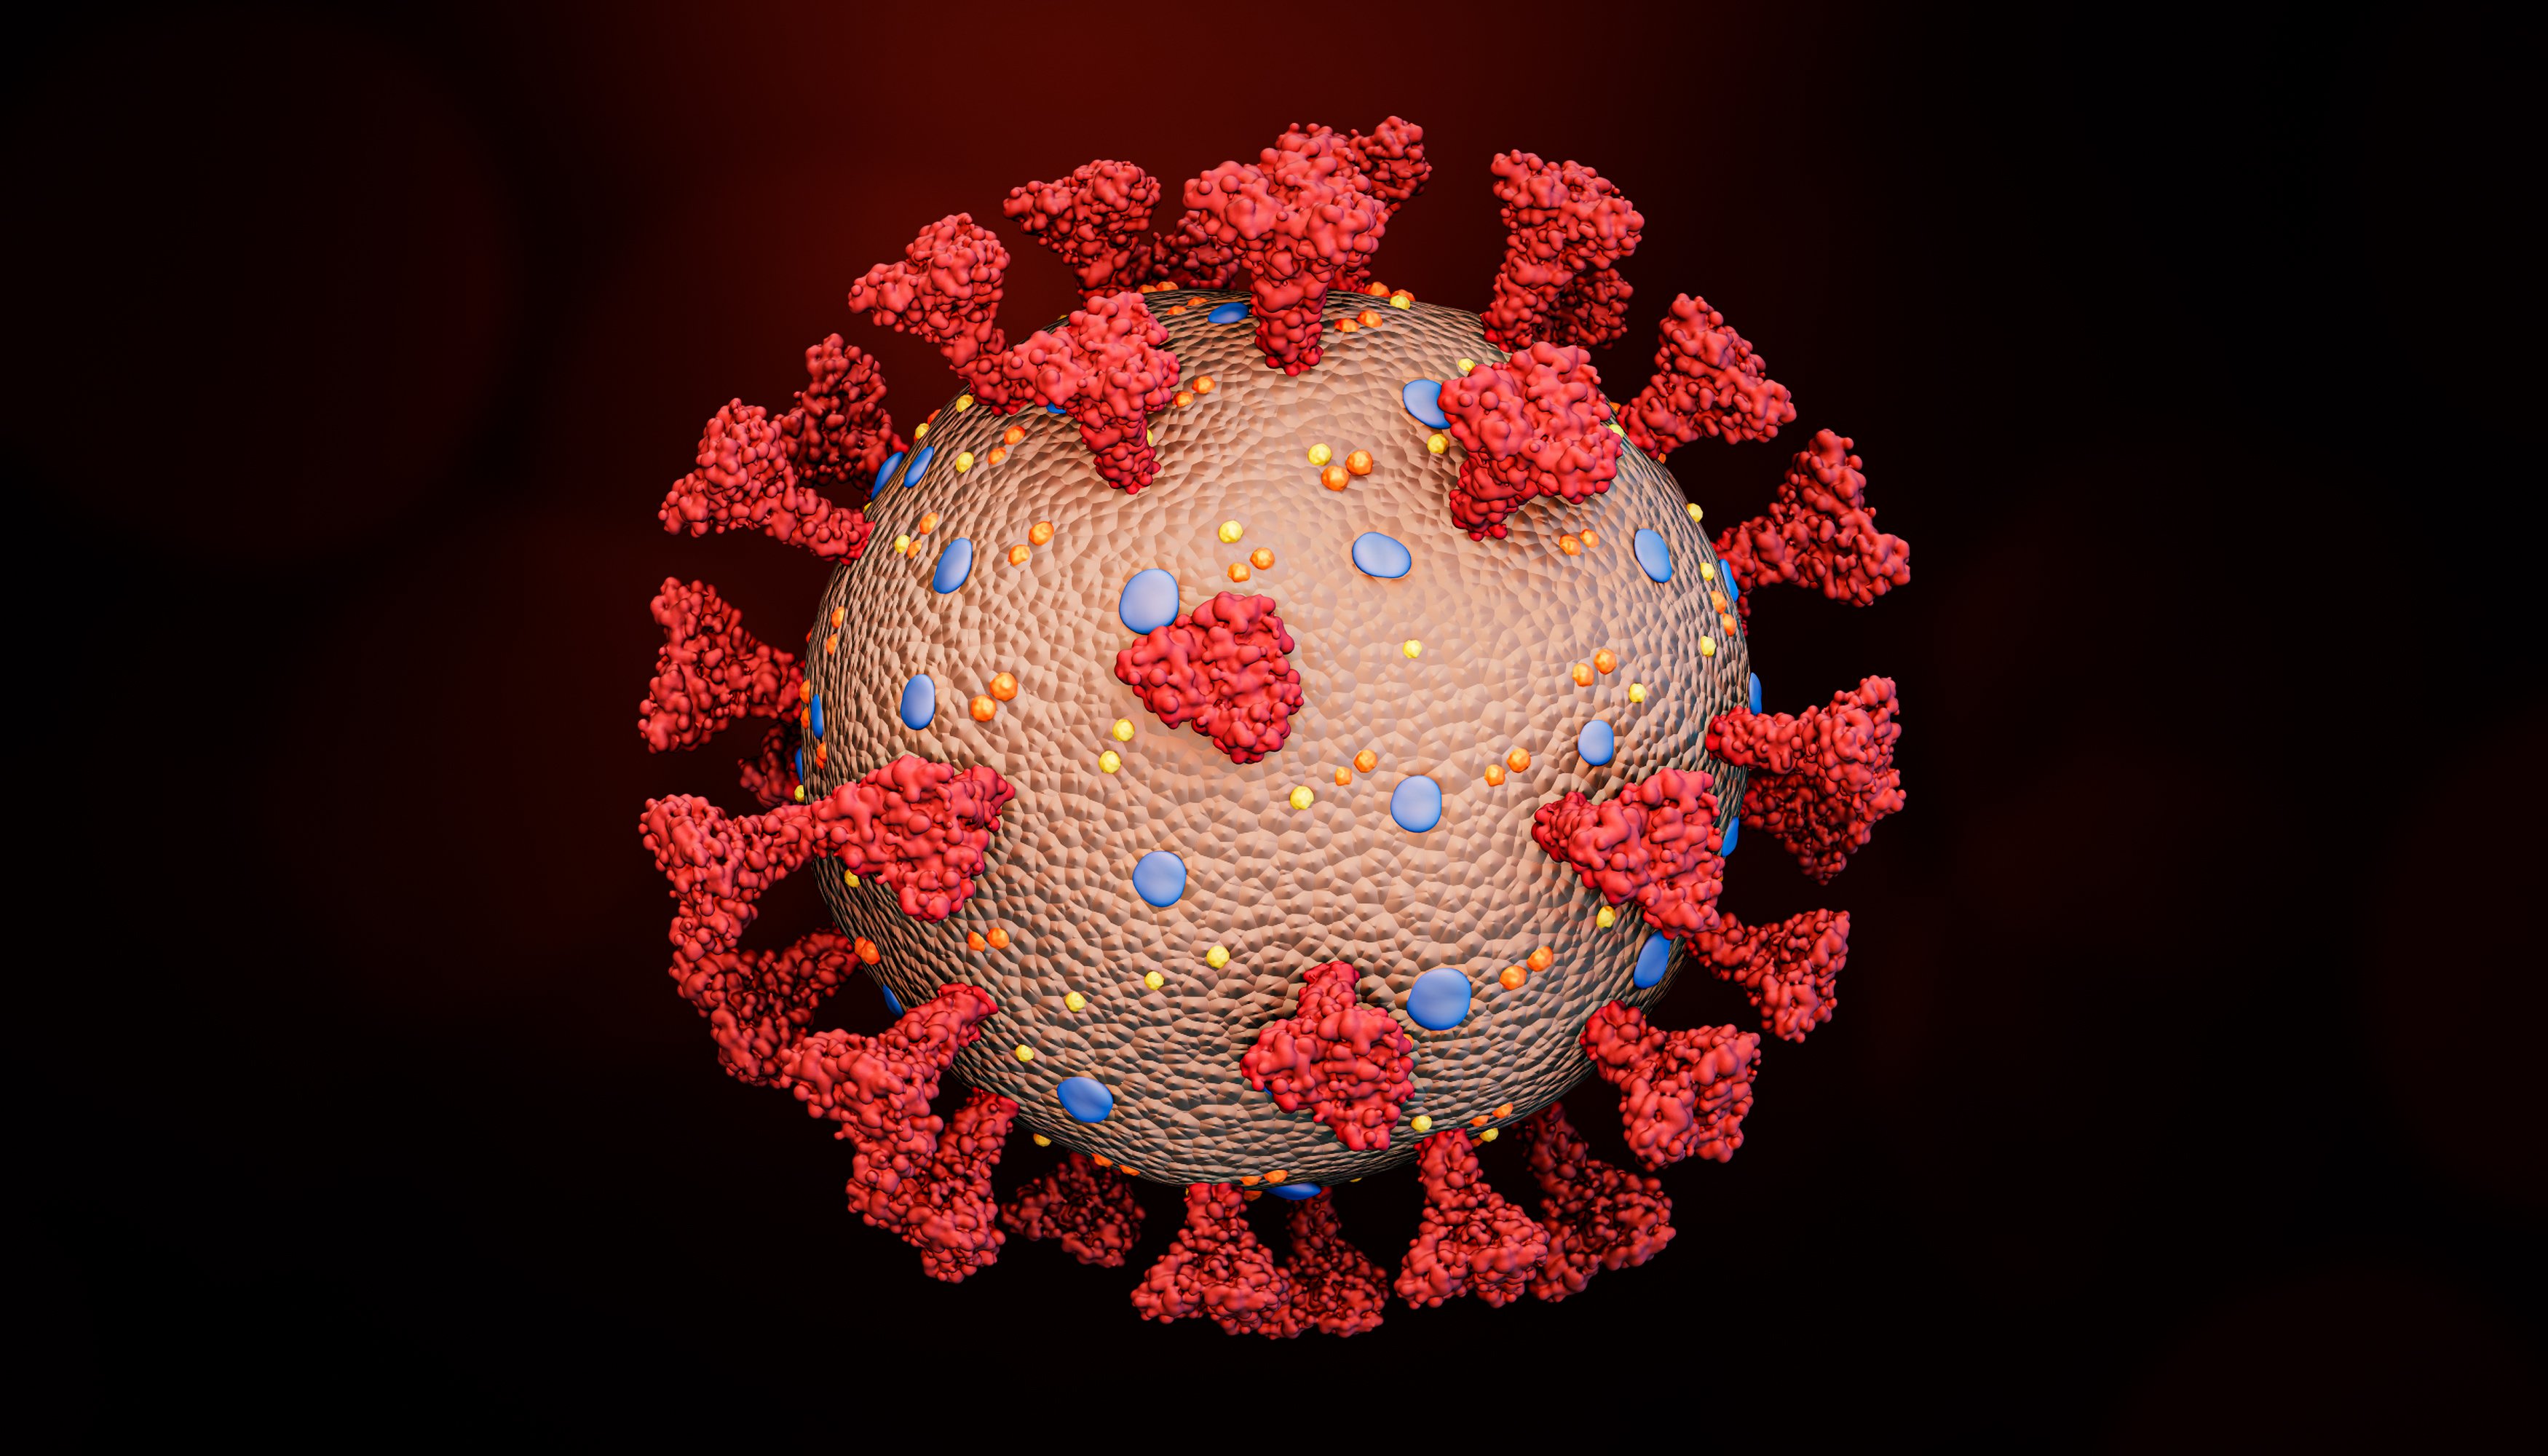 Rendering of COVID-19 or a flu virus structure with spikes